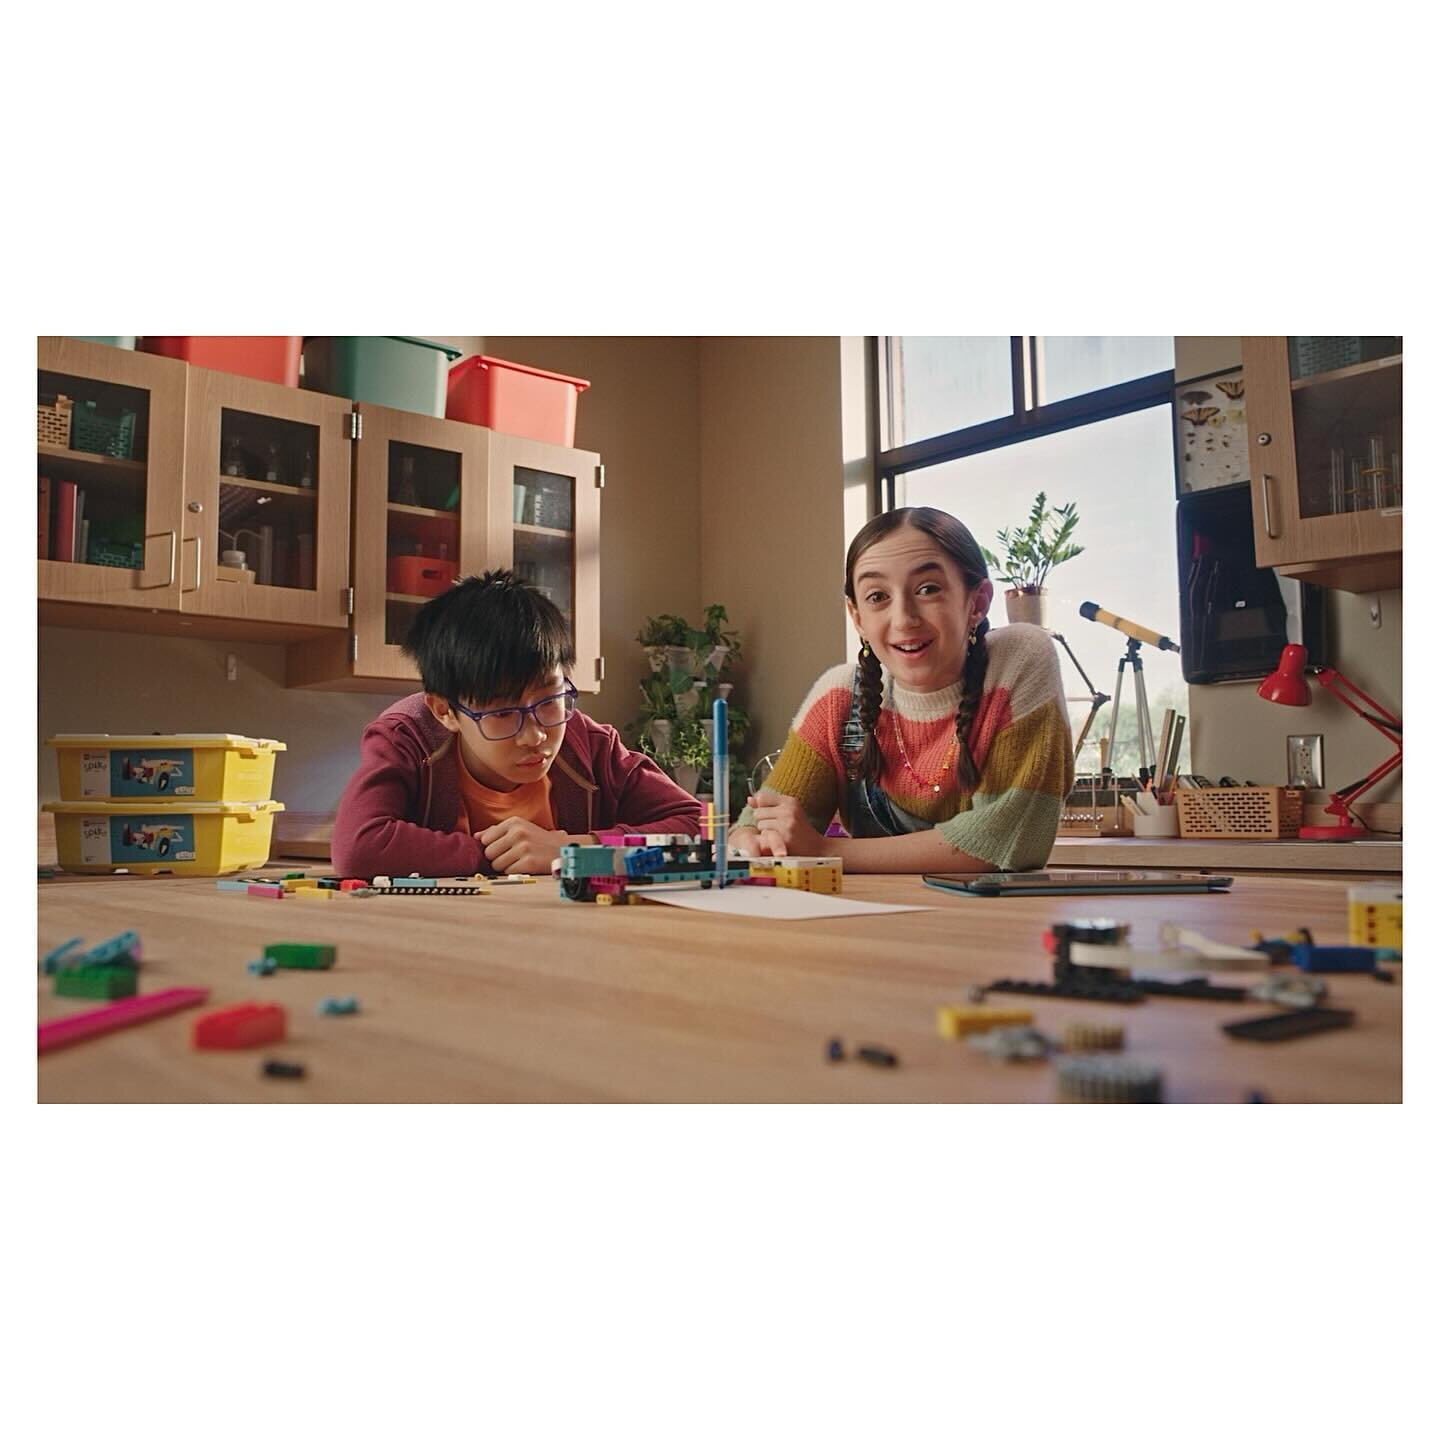 LEGO! Some stills from a fun commercial I shot late last year with the &uuml;ber talented @danieliglesiasjr. We got to think about playing with legos during pre pro, what a win! This job ruled (Except for the time I accidentally smashed my fingernail